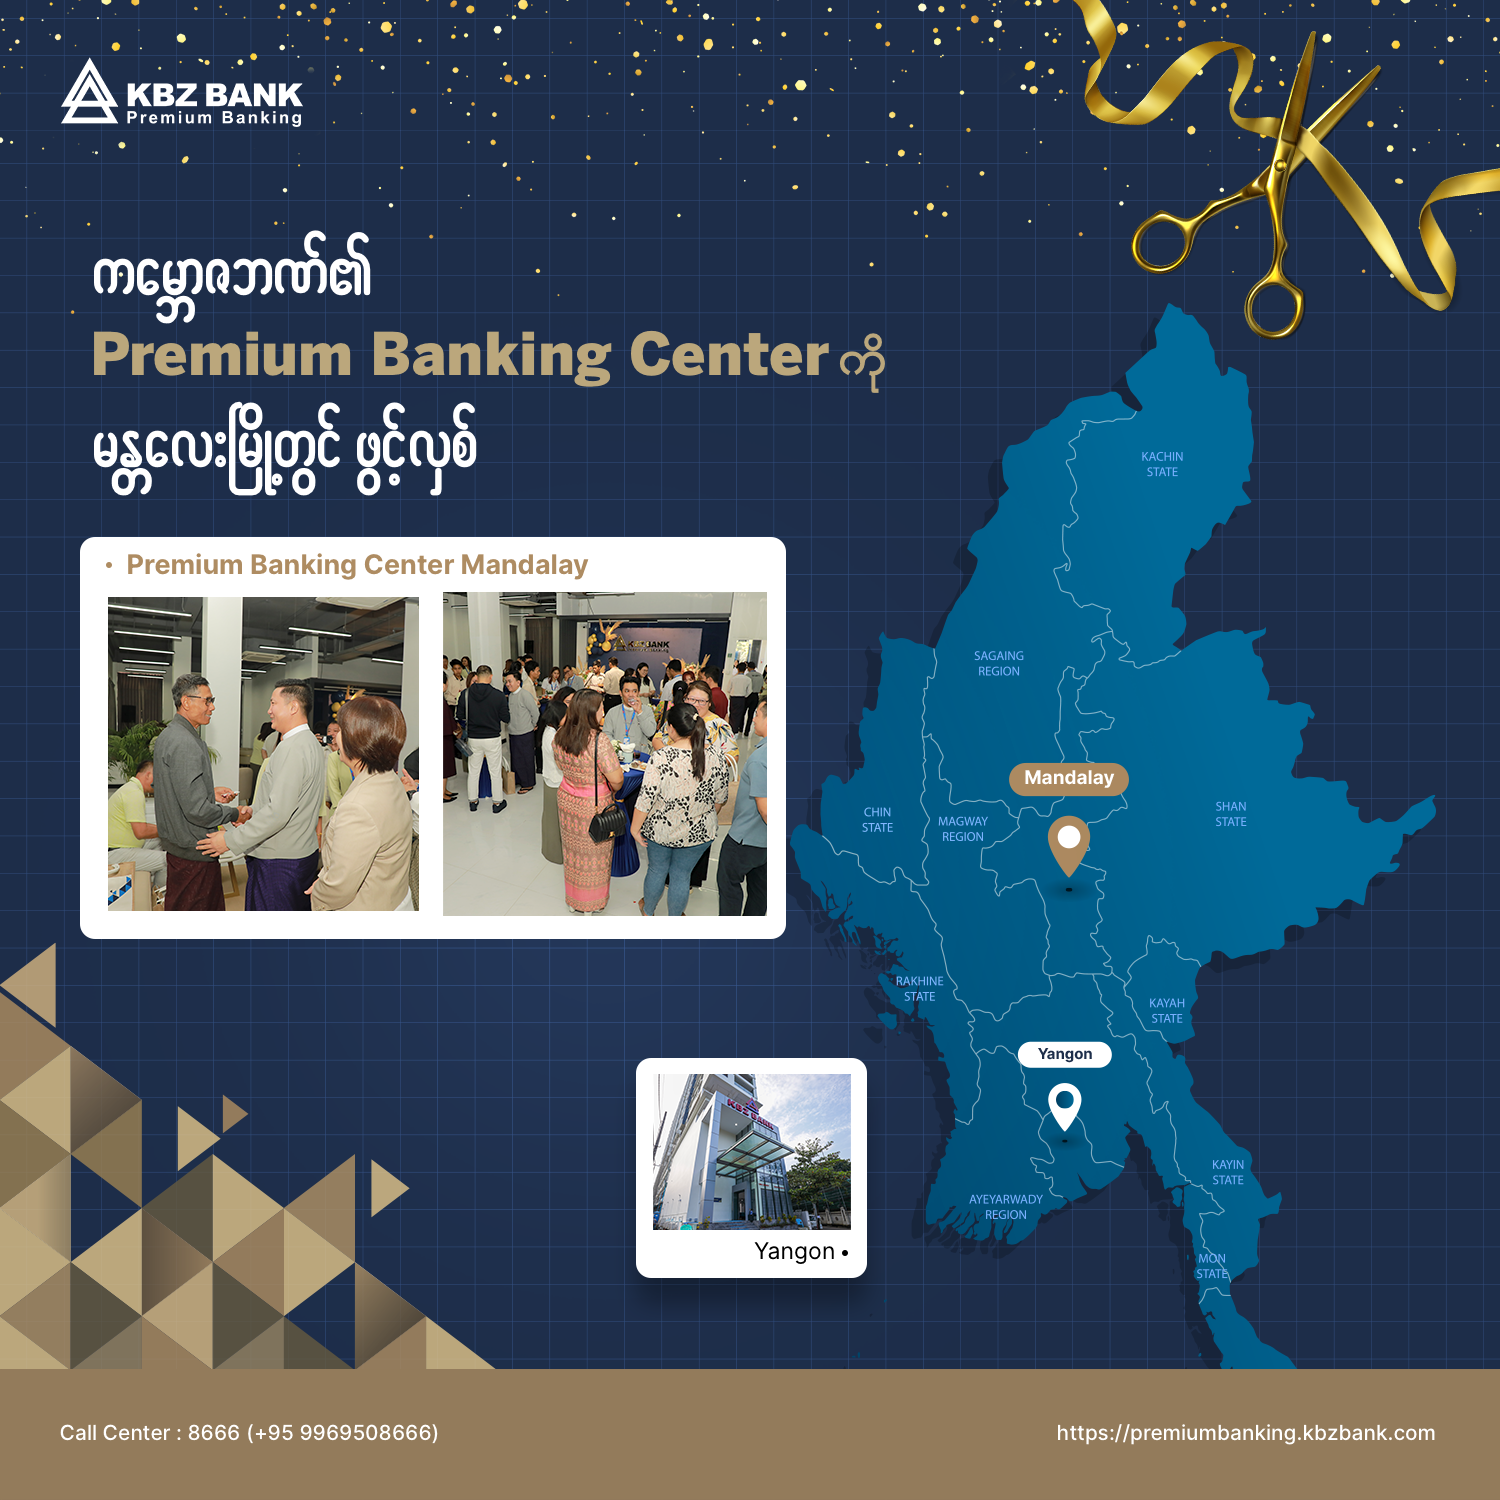 KBZ Bank’s Premium Banking Center Opens in Mandalay for Banking Luxury